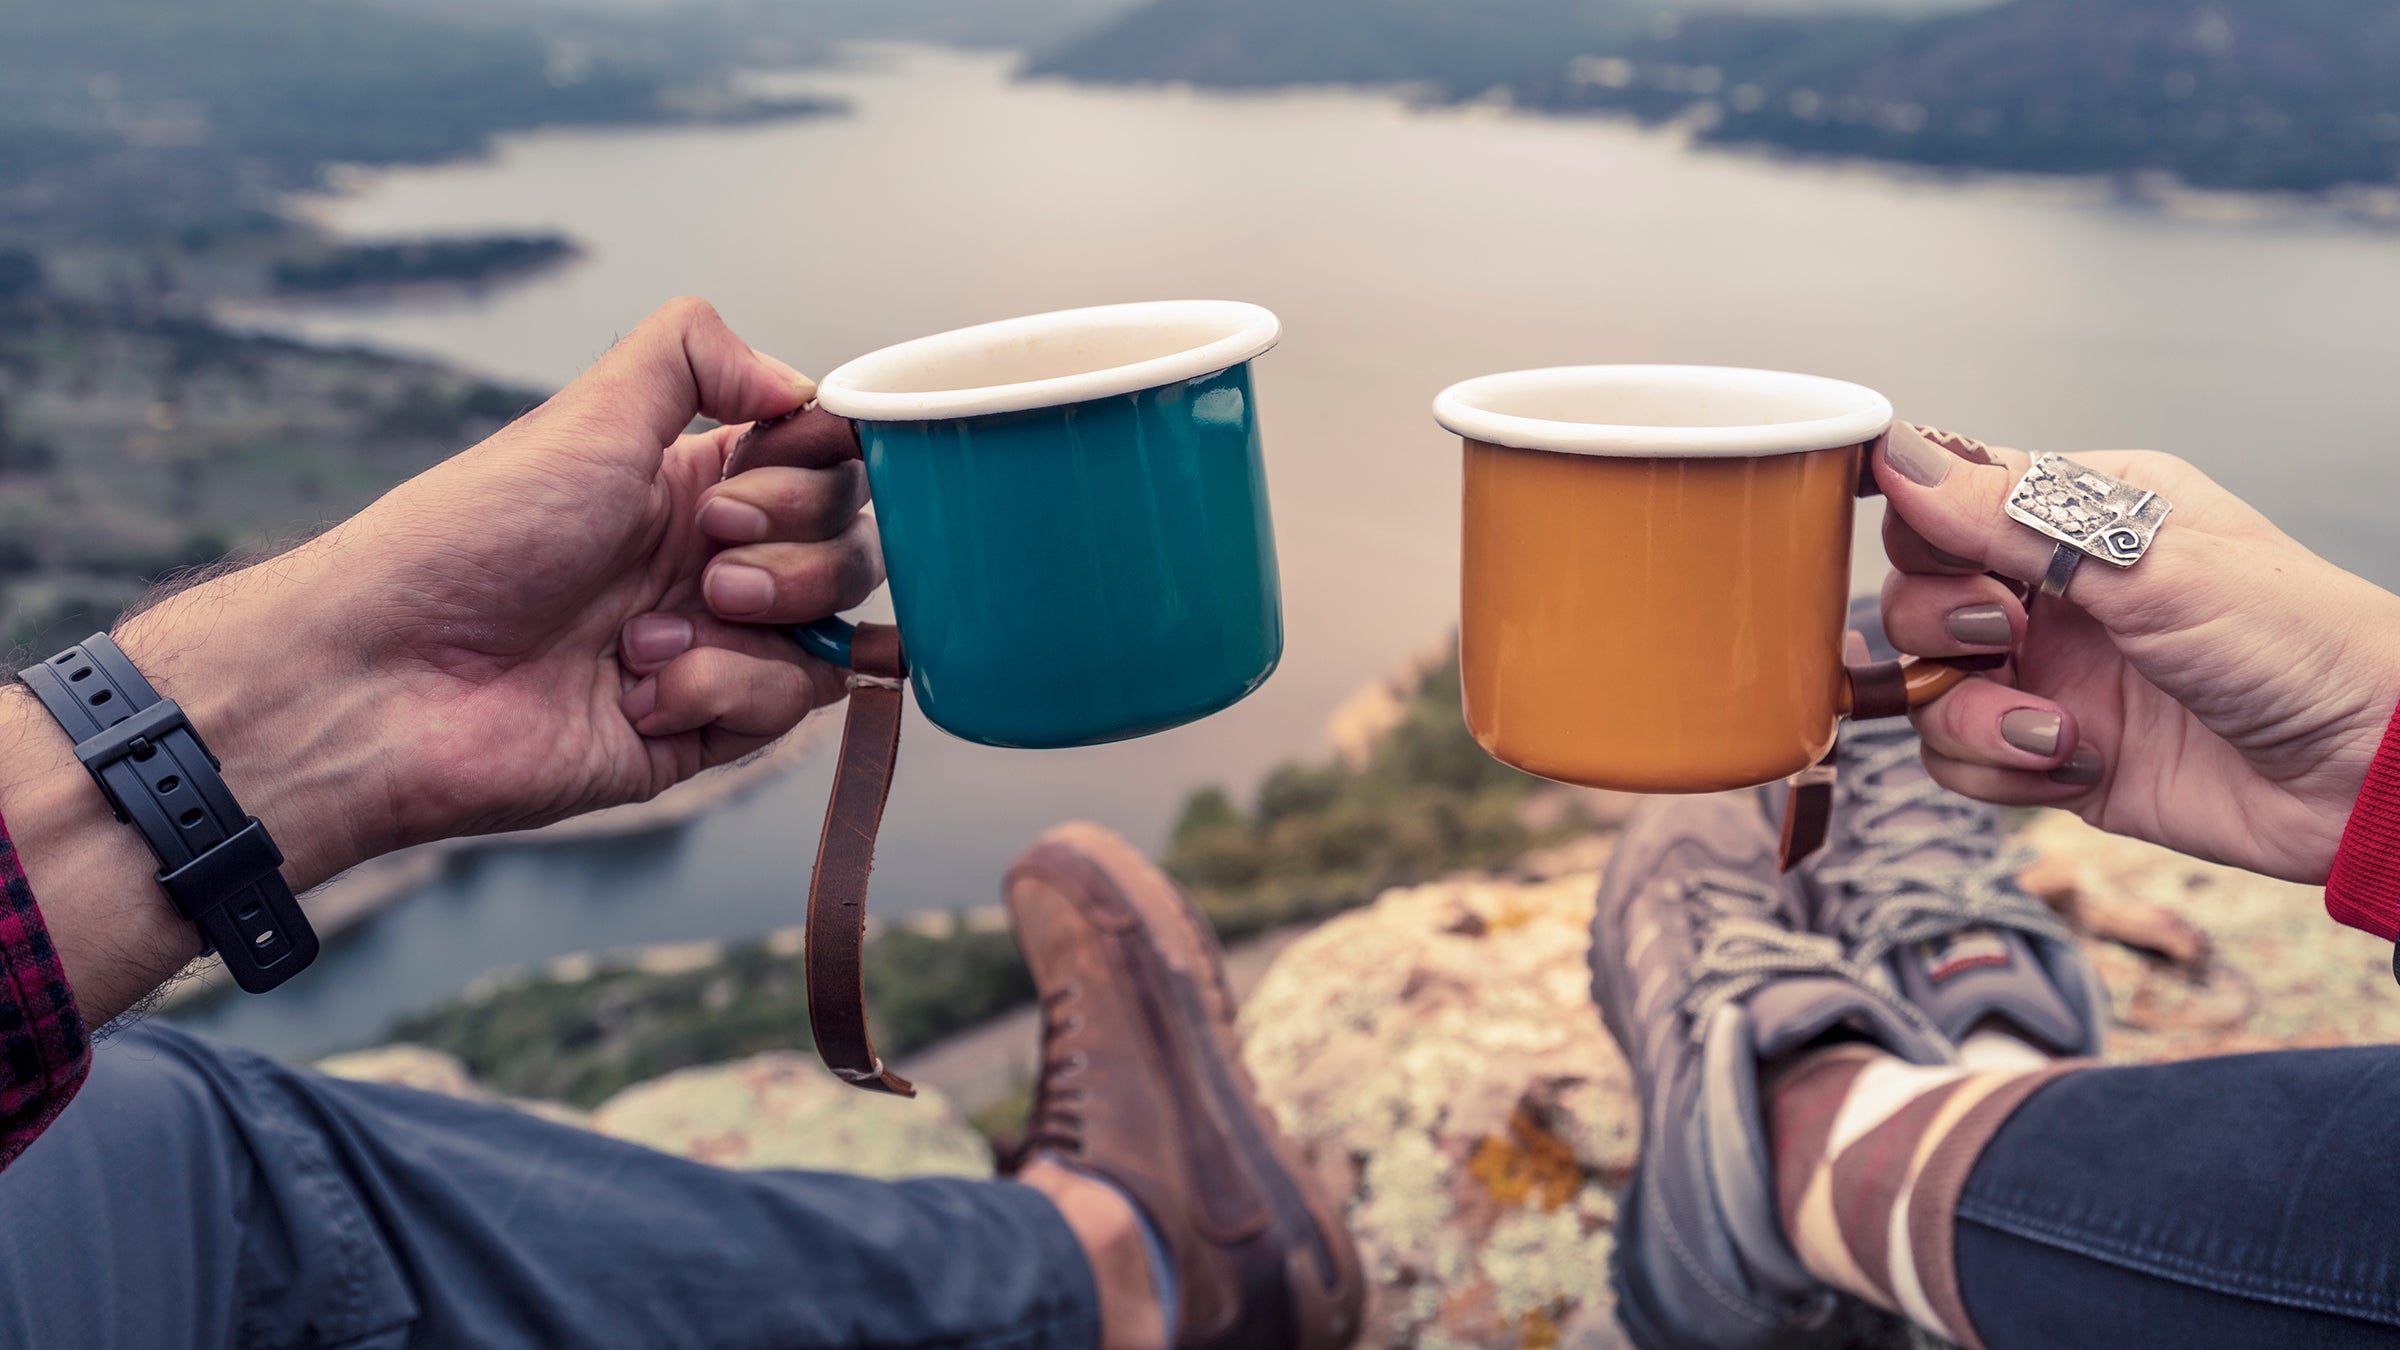 Hydro Flask Coffee Mug Review: 'Hot' Gifts For Outdoor Lovers!